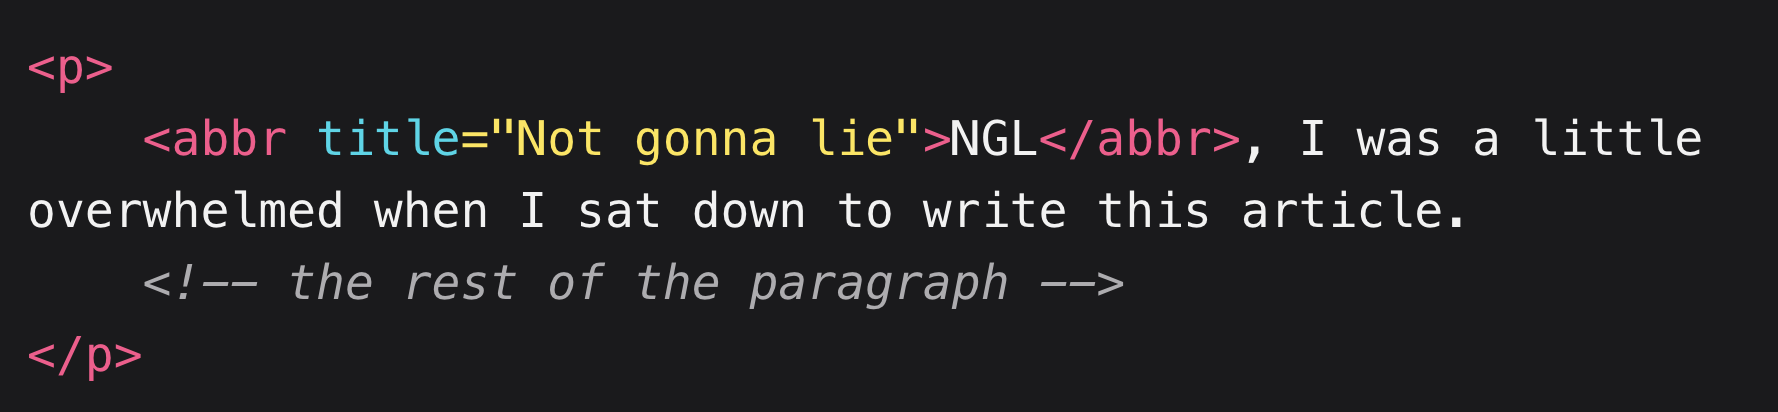 HTML code: &lt;p&gt;     &lt;abbr title=&quot;Not gonna lie&quot;&gt;NGL&lt;/abbr&gt;, I was a little overwhelmed when I sat down to write this article.     &lt;!-- the rest of the paragraph --&gt; &lt;/p&gt;